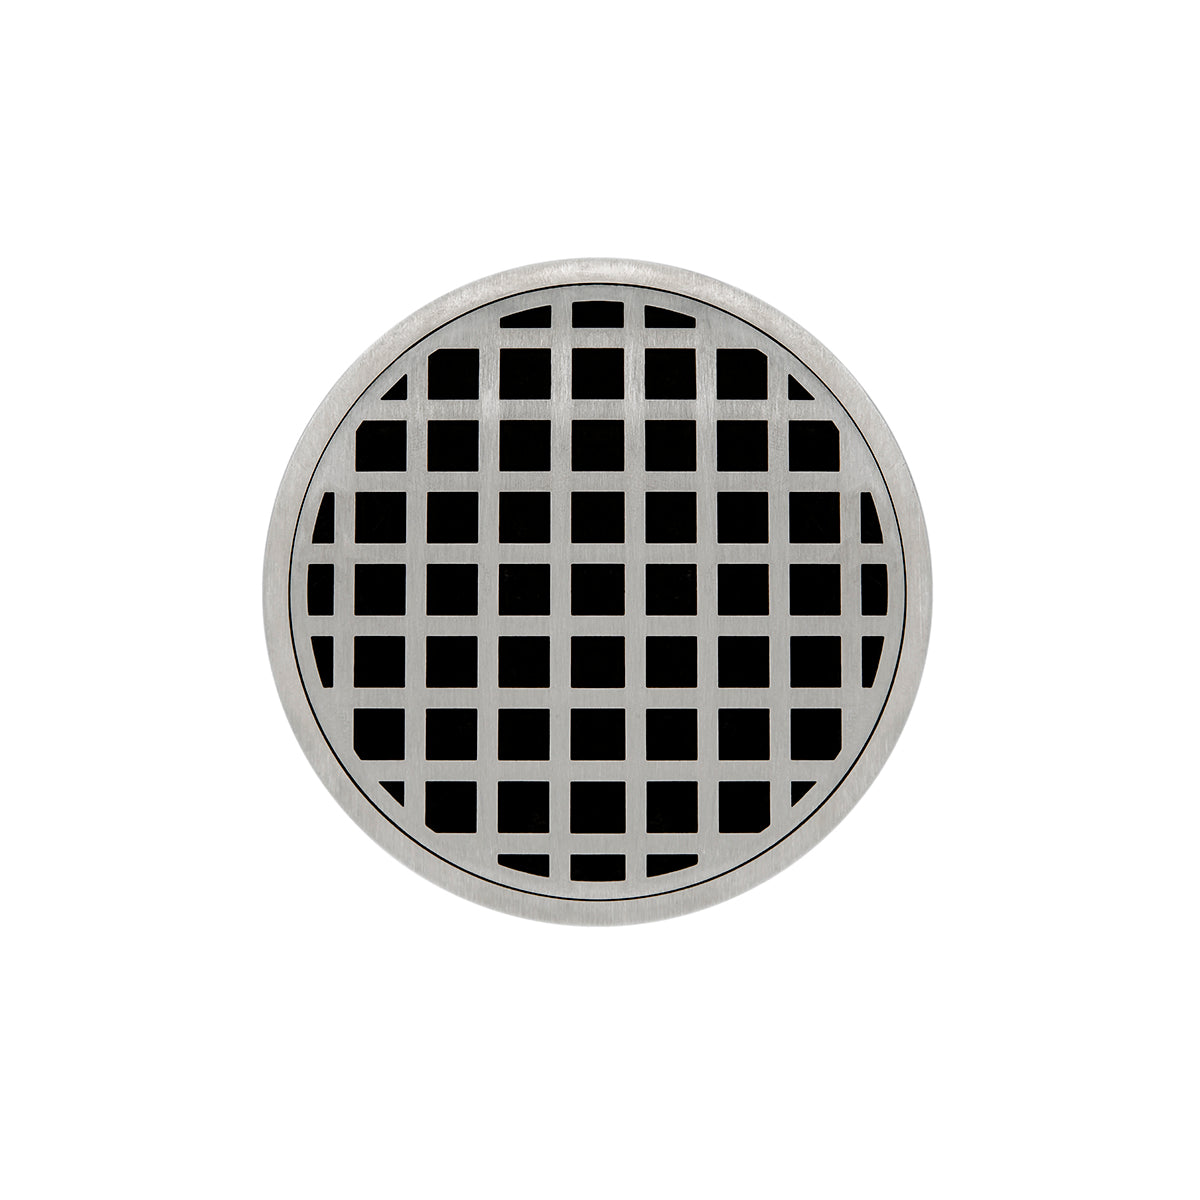 Infinity Drain 5" Round RQD 5 High Flow Premium Center Drain Kit with Squares Pattern Decorative Plate with PVC Drain Body, 3" Outlet